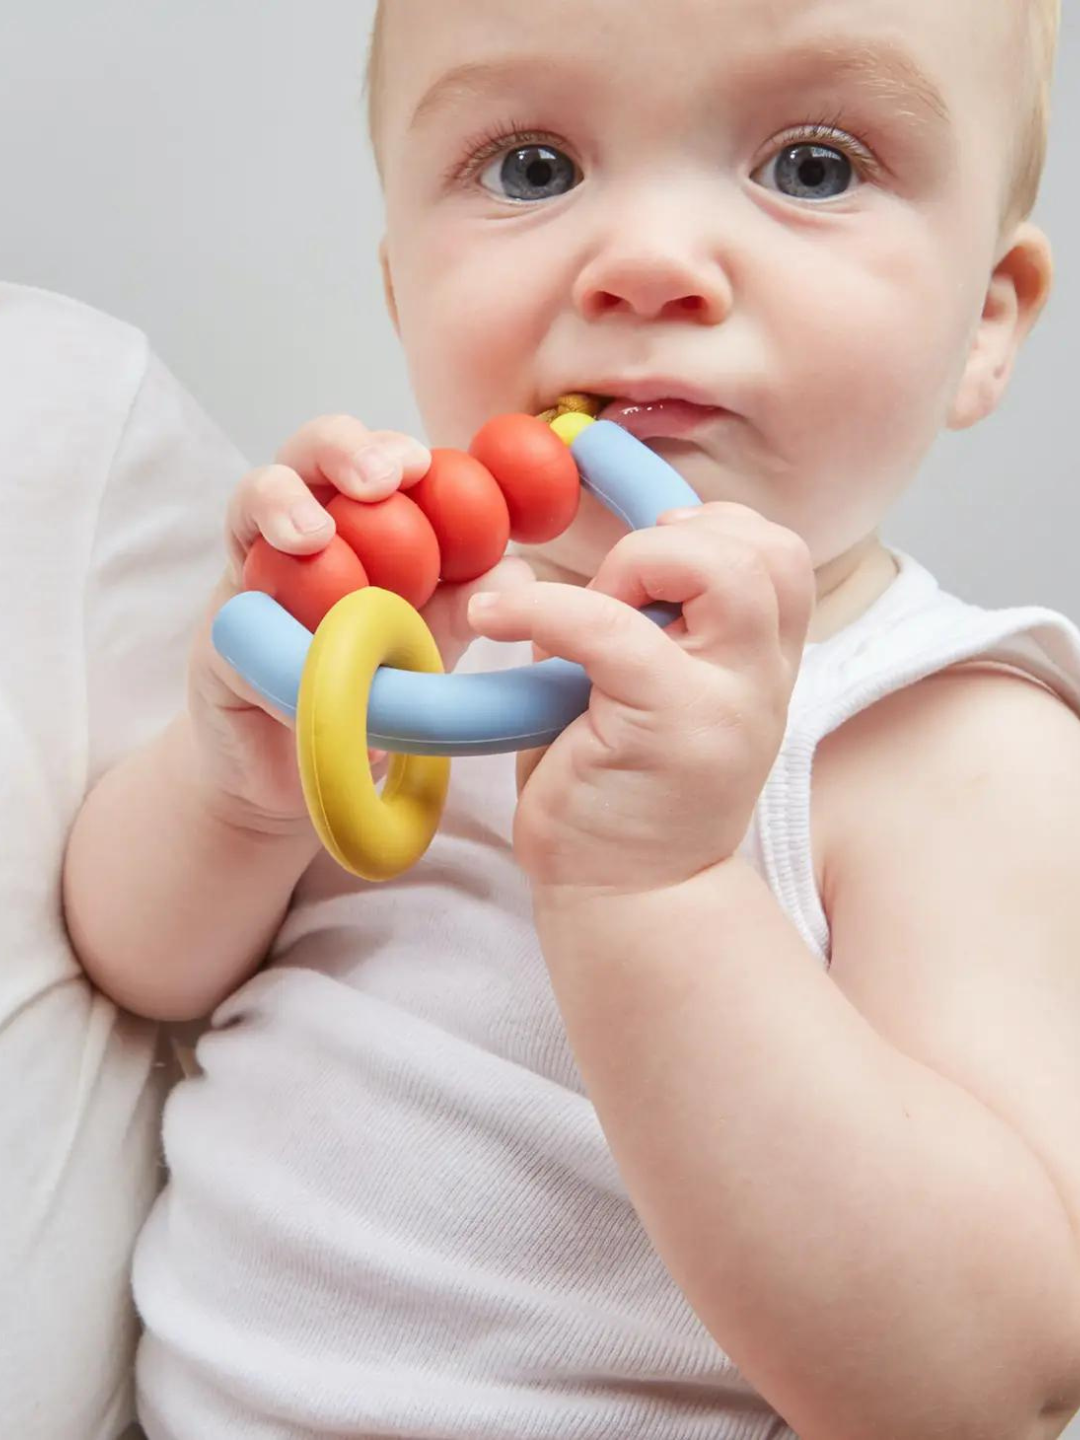 Primary | Baby chewing blue semicircle teether strung with red beads and yellow ring